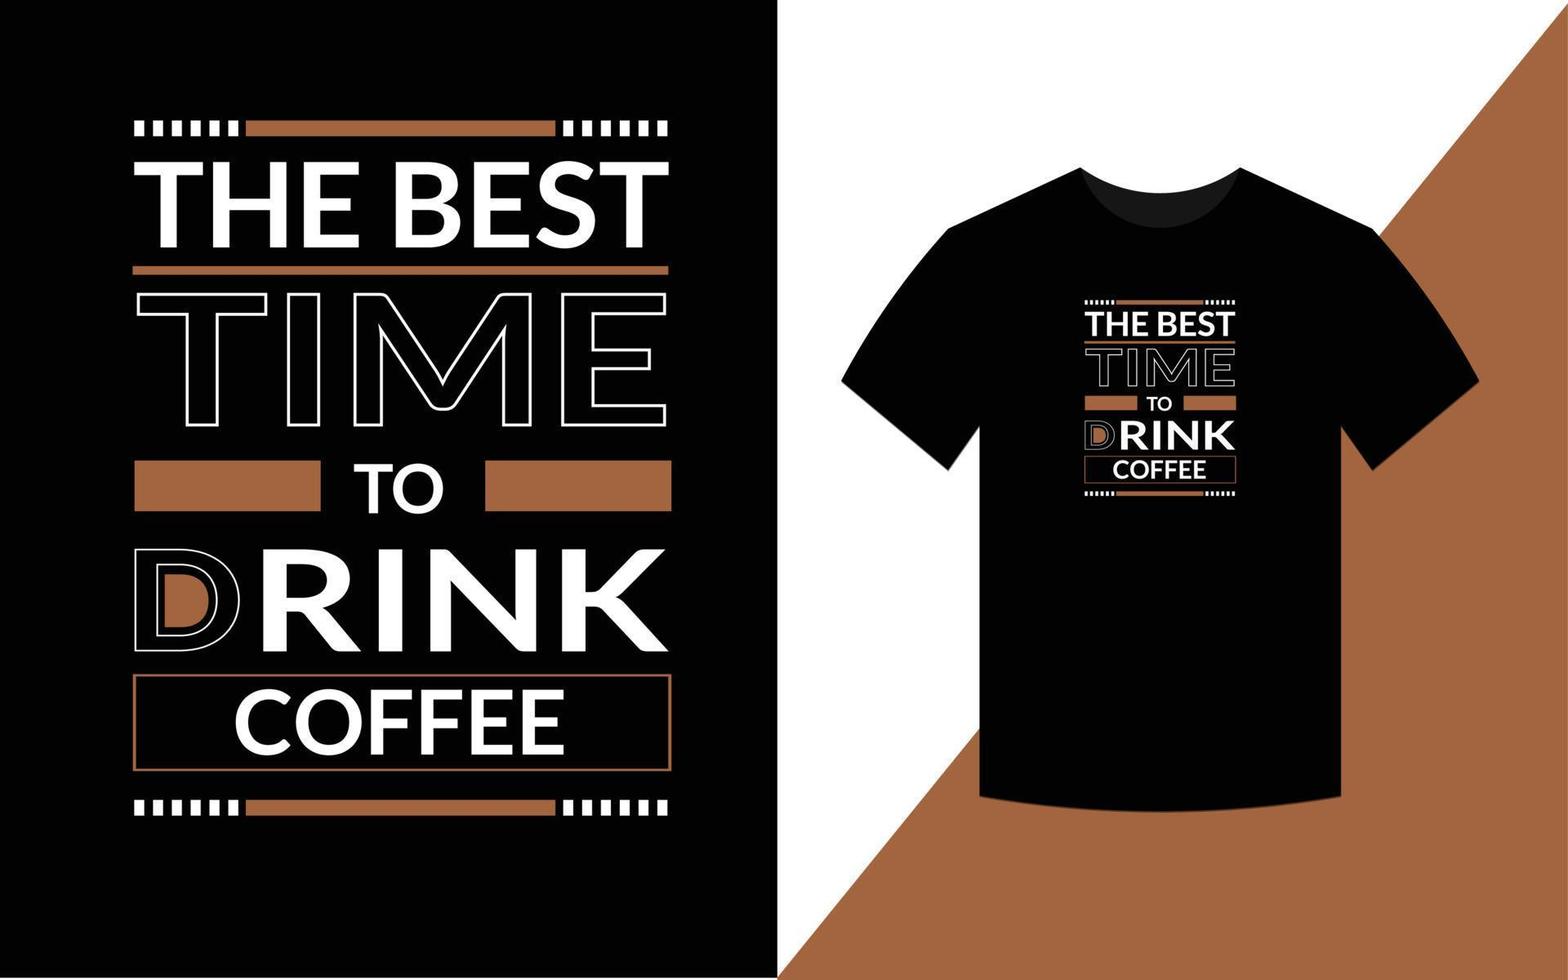 The best time to drink coffee, Modern Typography T shirt Design template vector